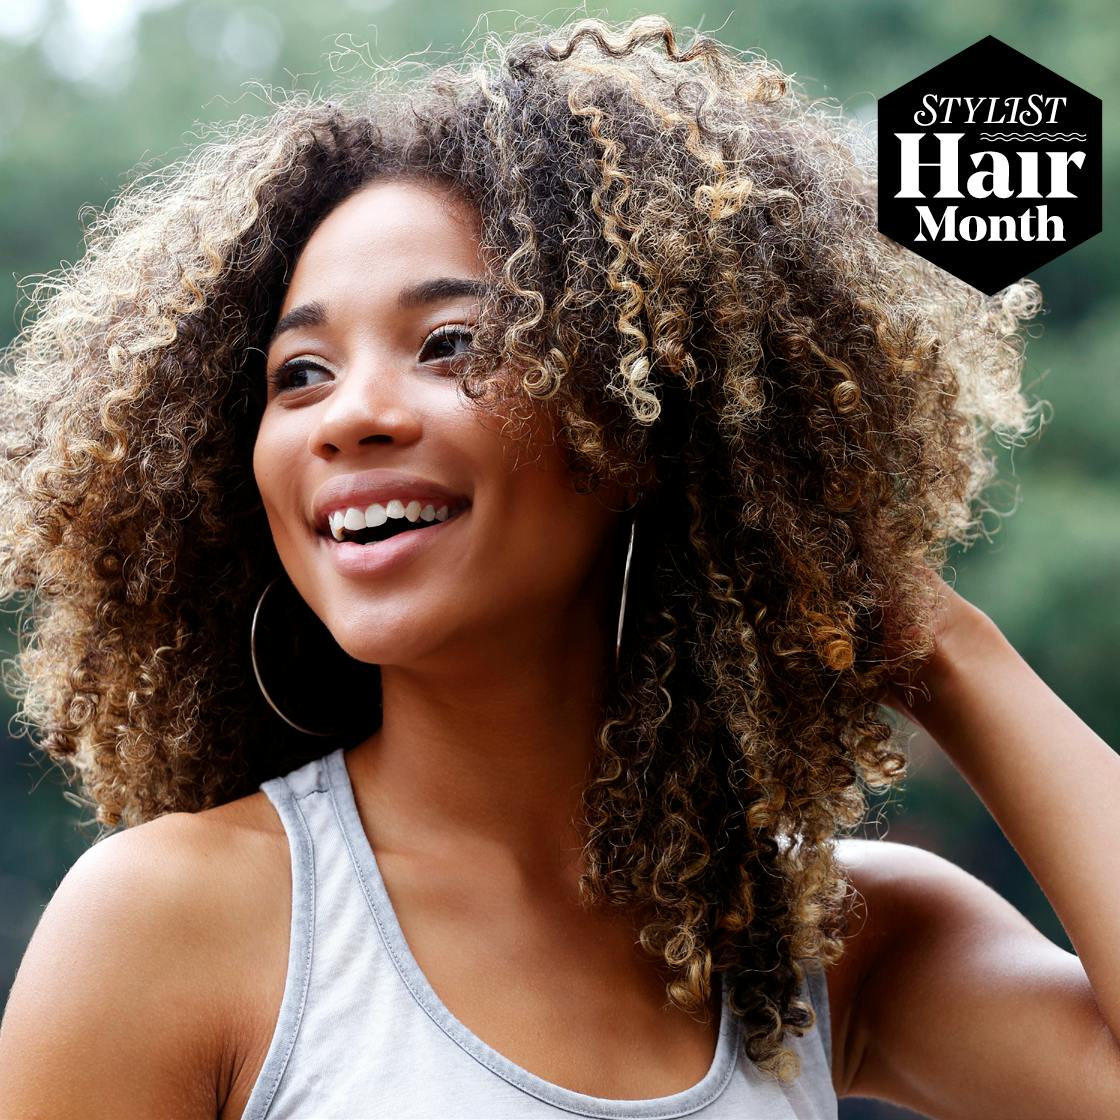 Micro-breakage is the reason your hair isn't growing